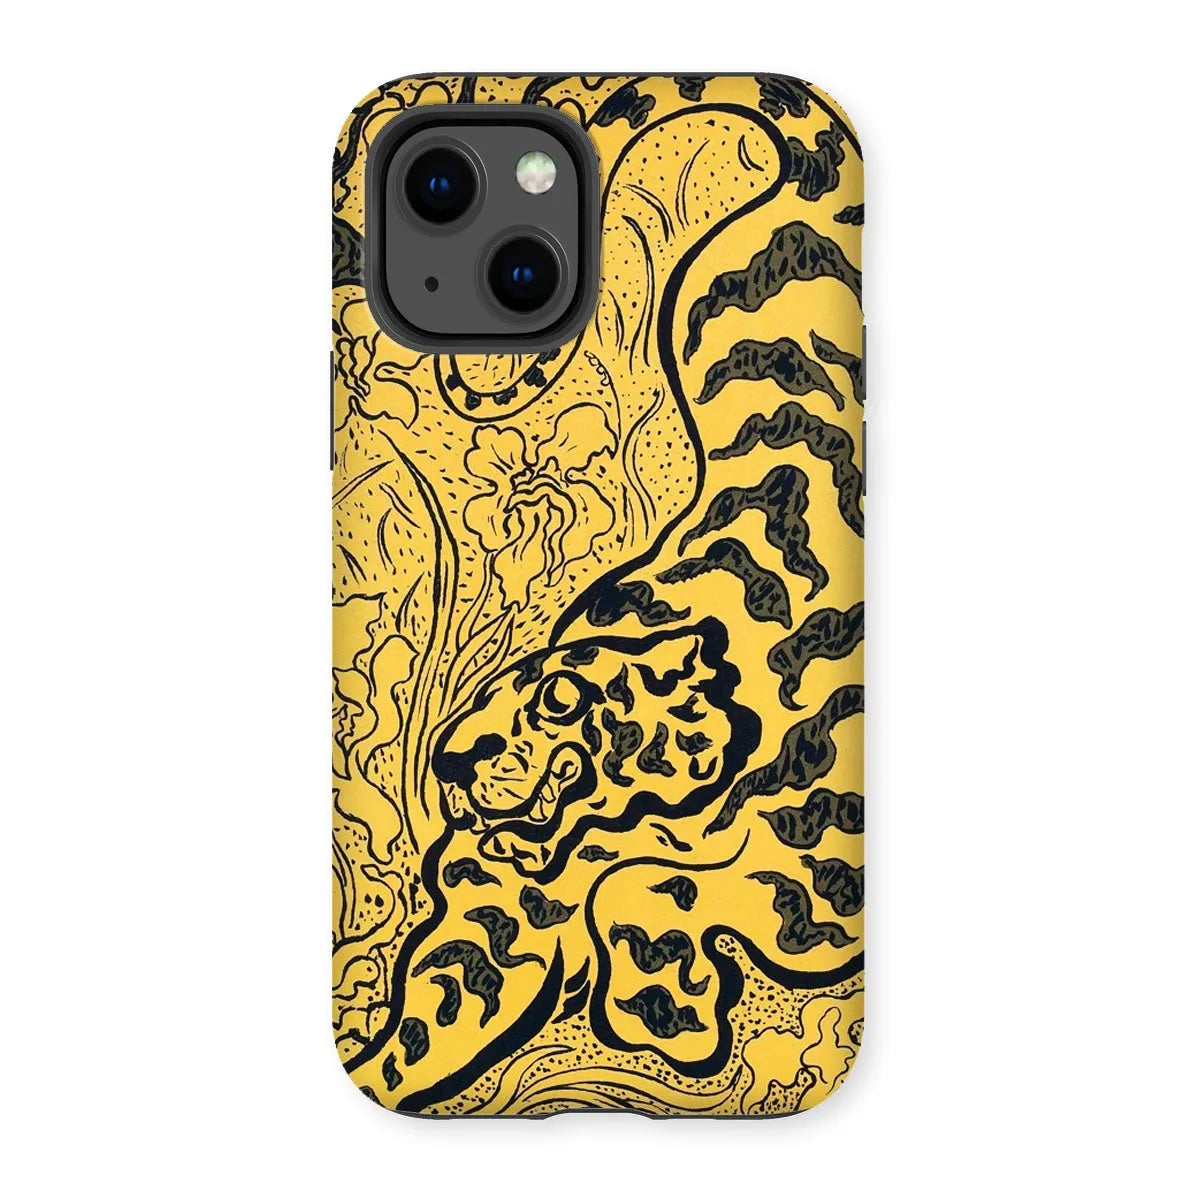 Tiger In The Jungle - Graphic Art Phone Case - Paul Ranson - Iphone 13 / Matte - Mobile Phone Cases - Aesthetic Art